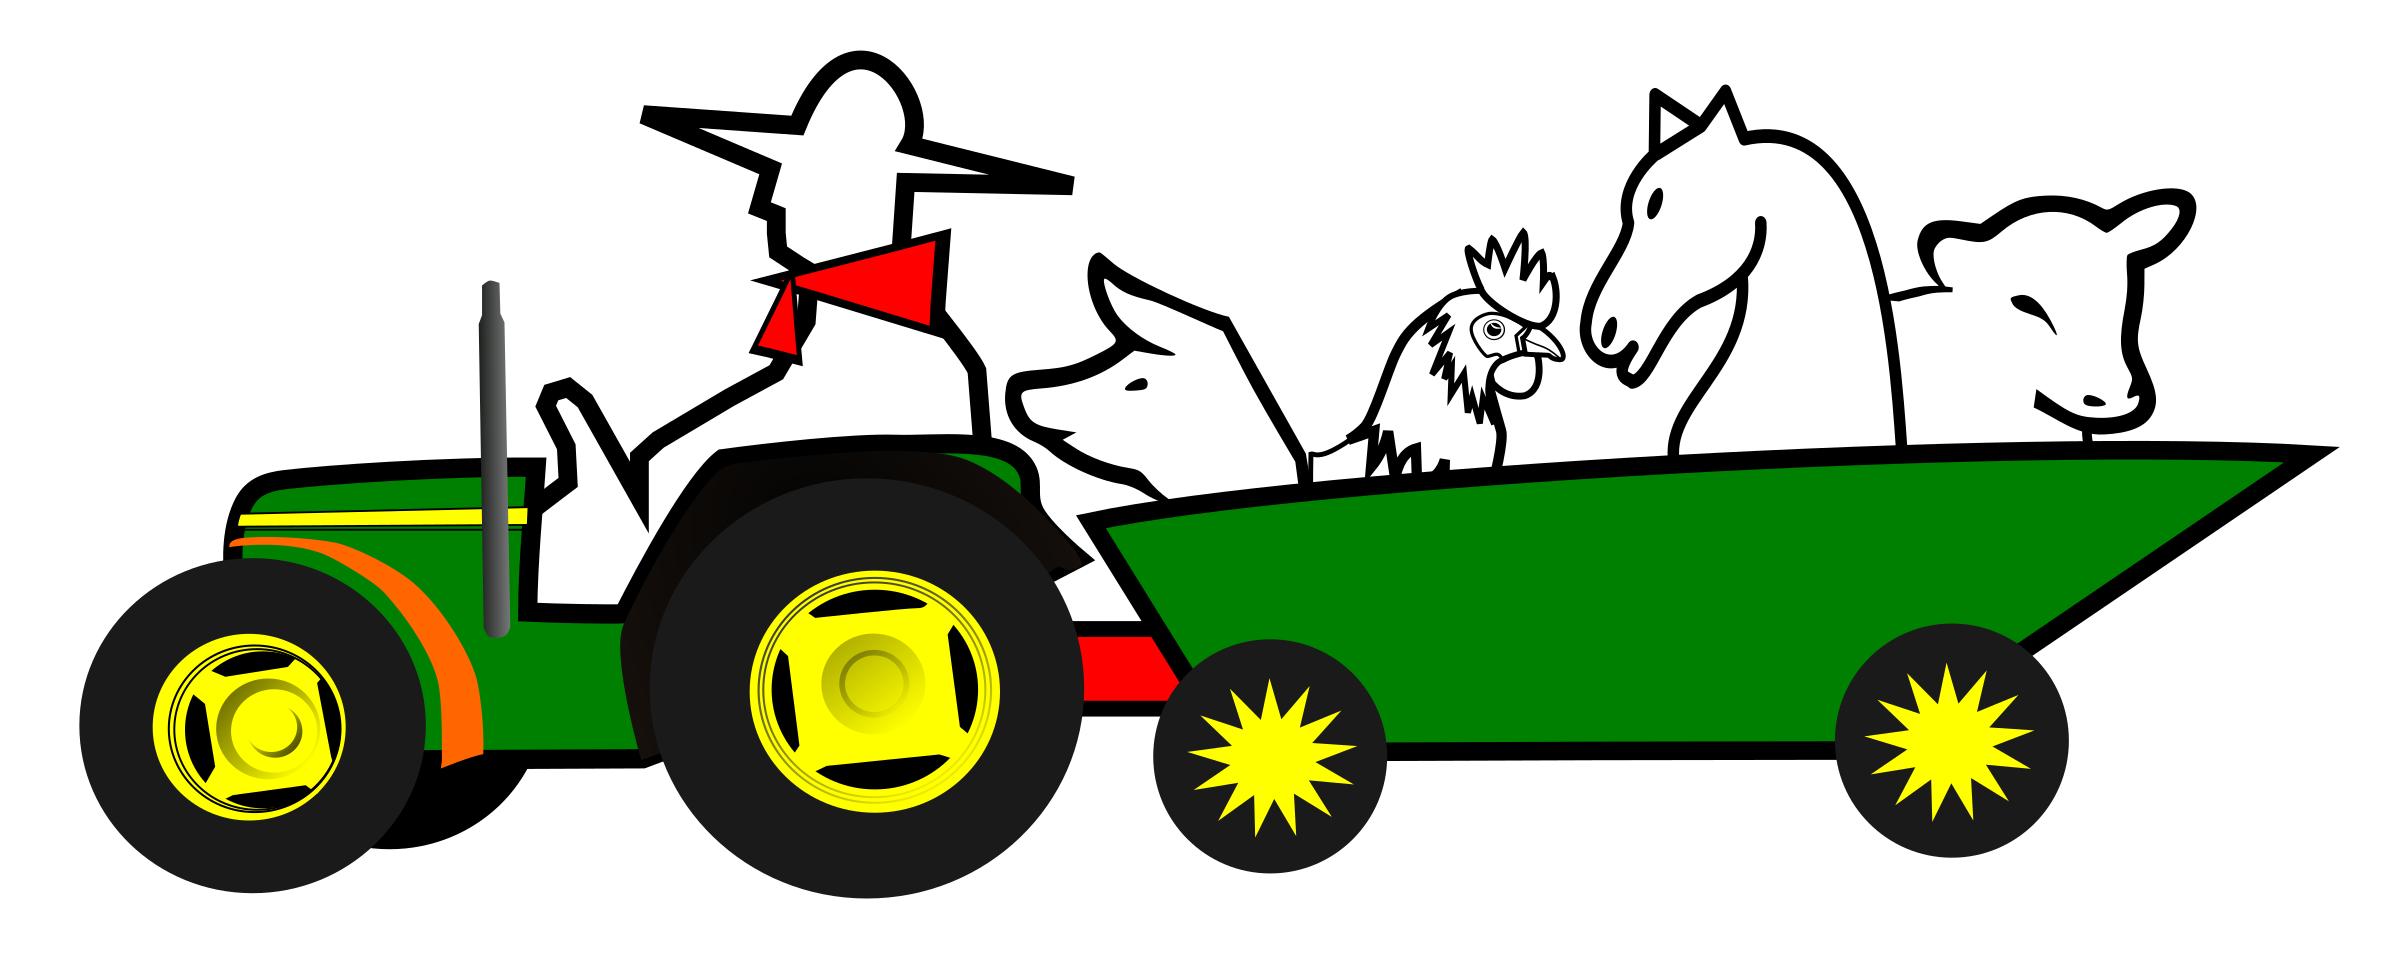 Logo tractor animales png